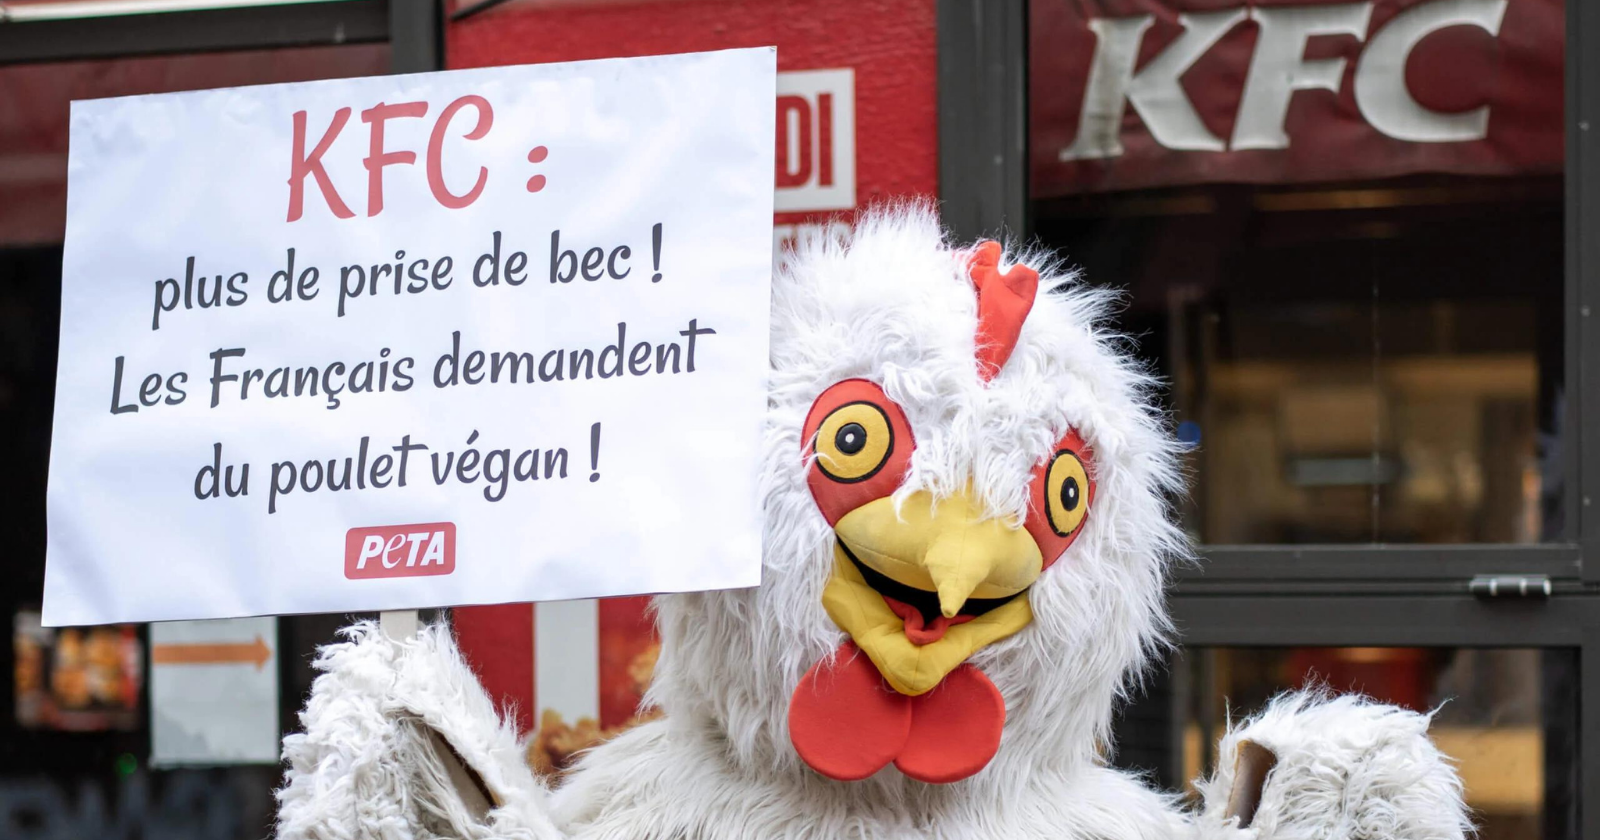 Peta challenges KFC to demand the introduction of its vegetable "chicken" in France